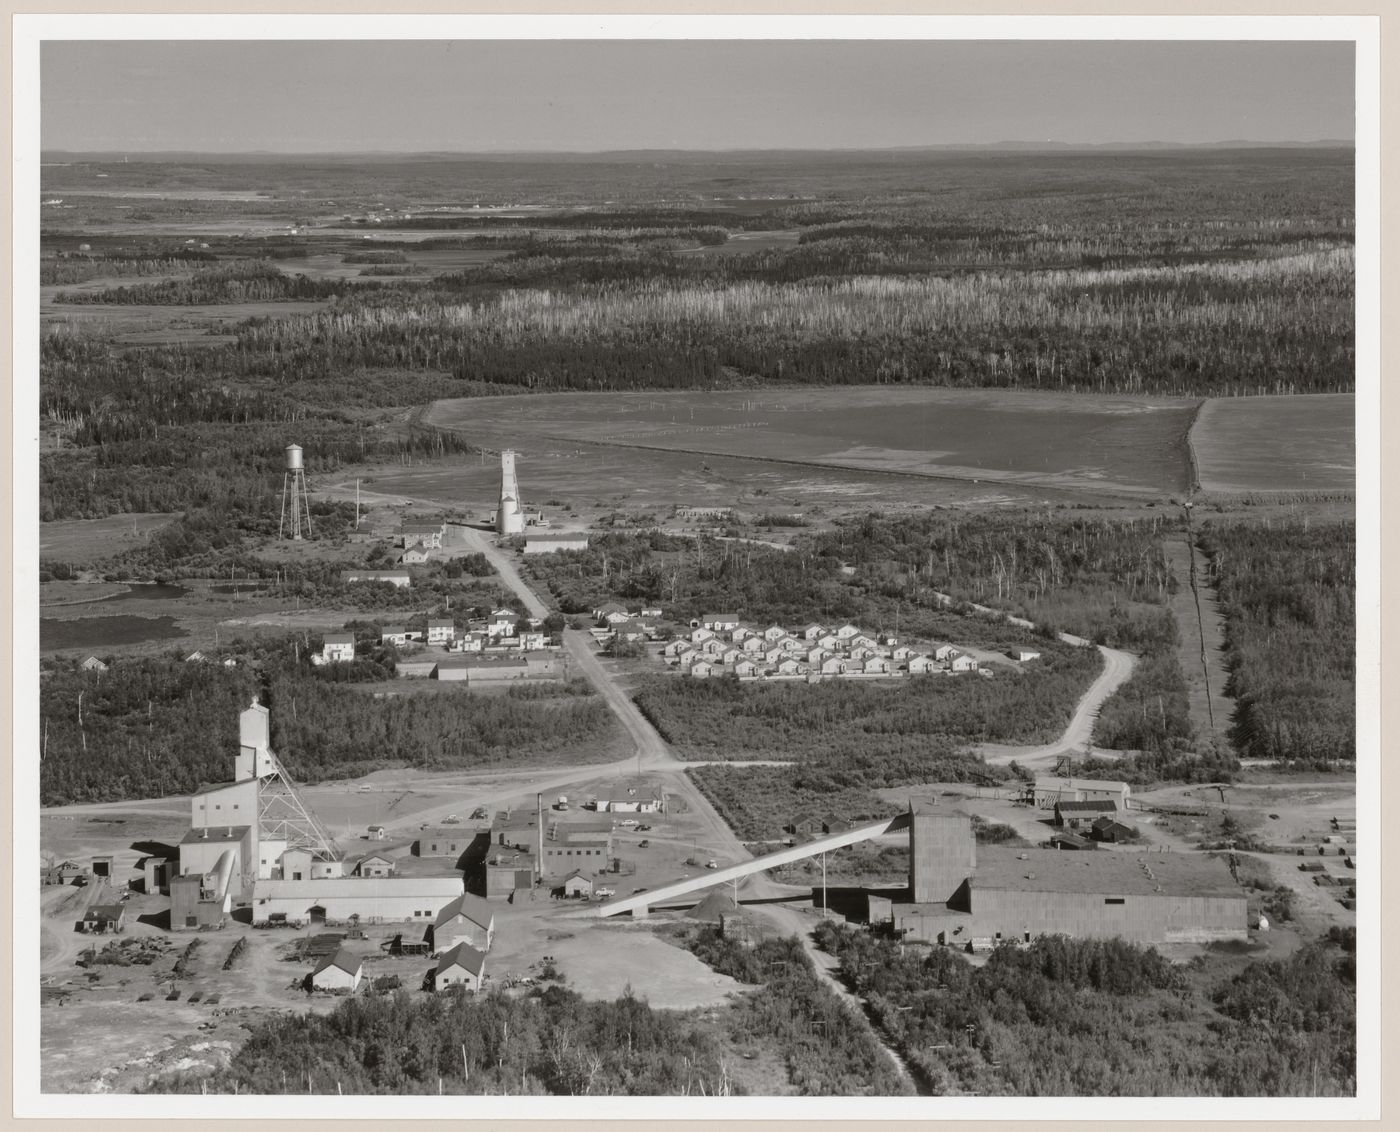 Fourniere and Dubuisson townships. Malartic Gold Fields Limited, Quebec